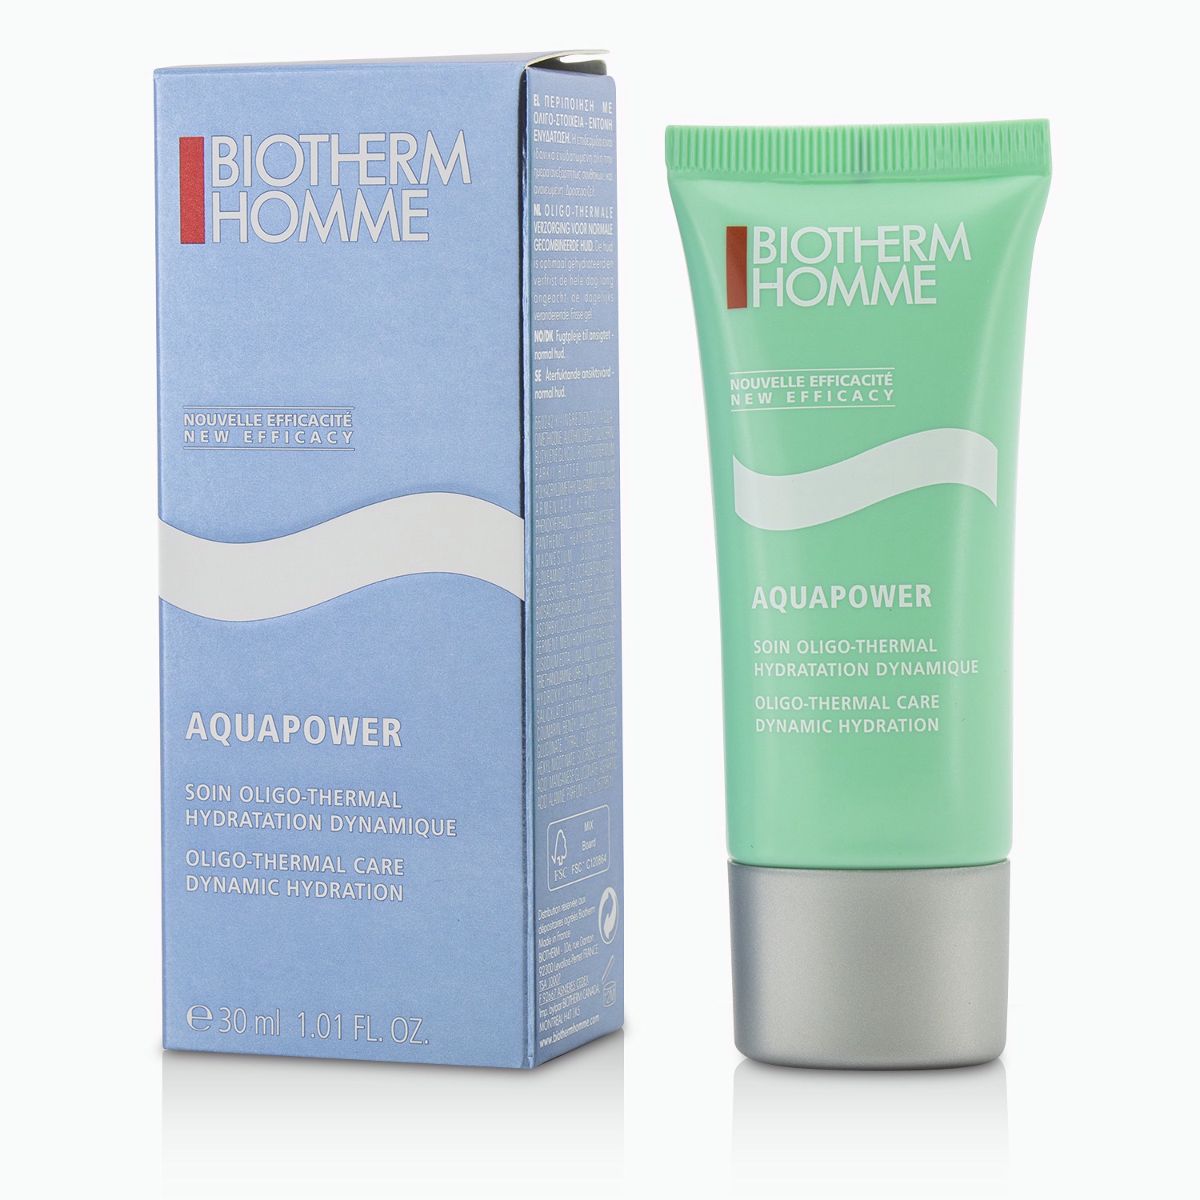 Homme Aquapower Biotherm Image